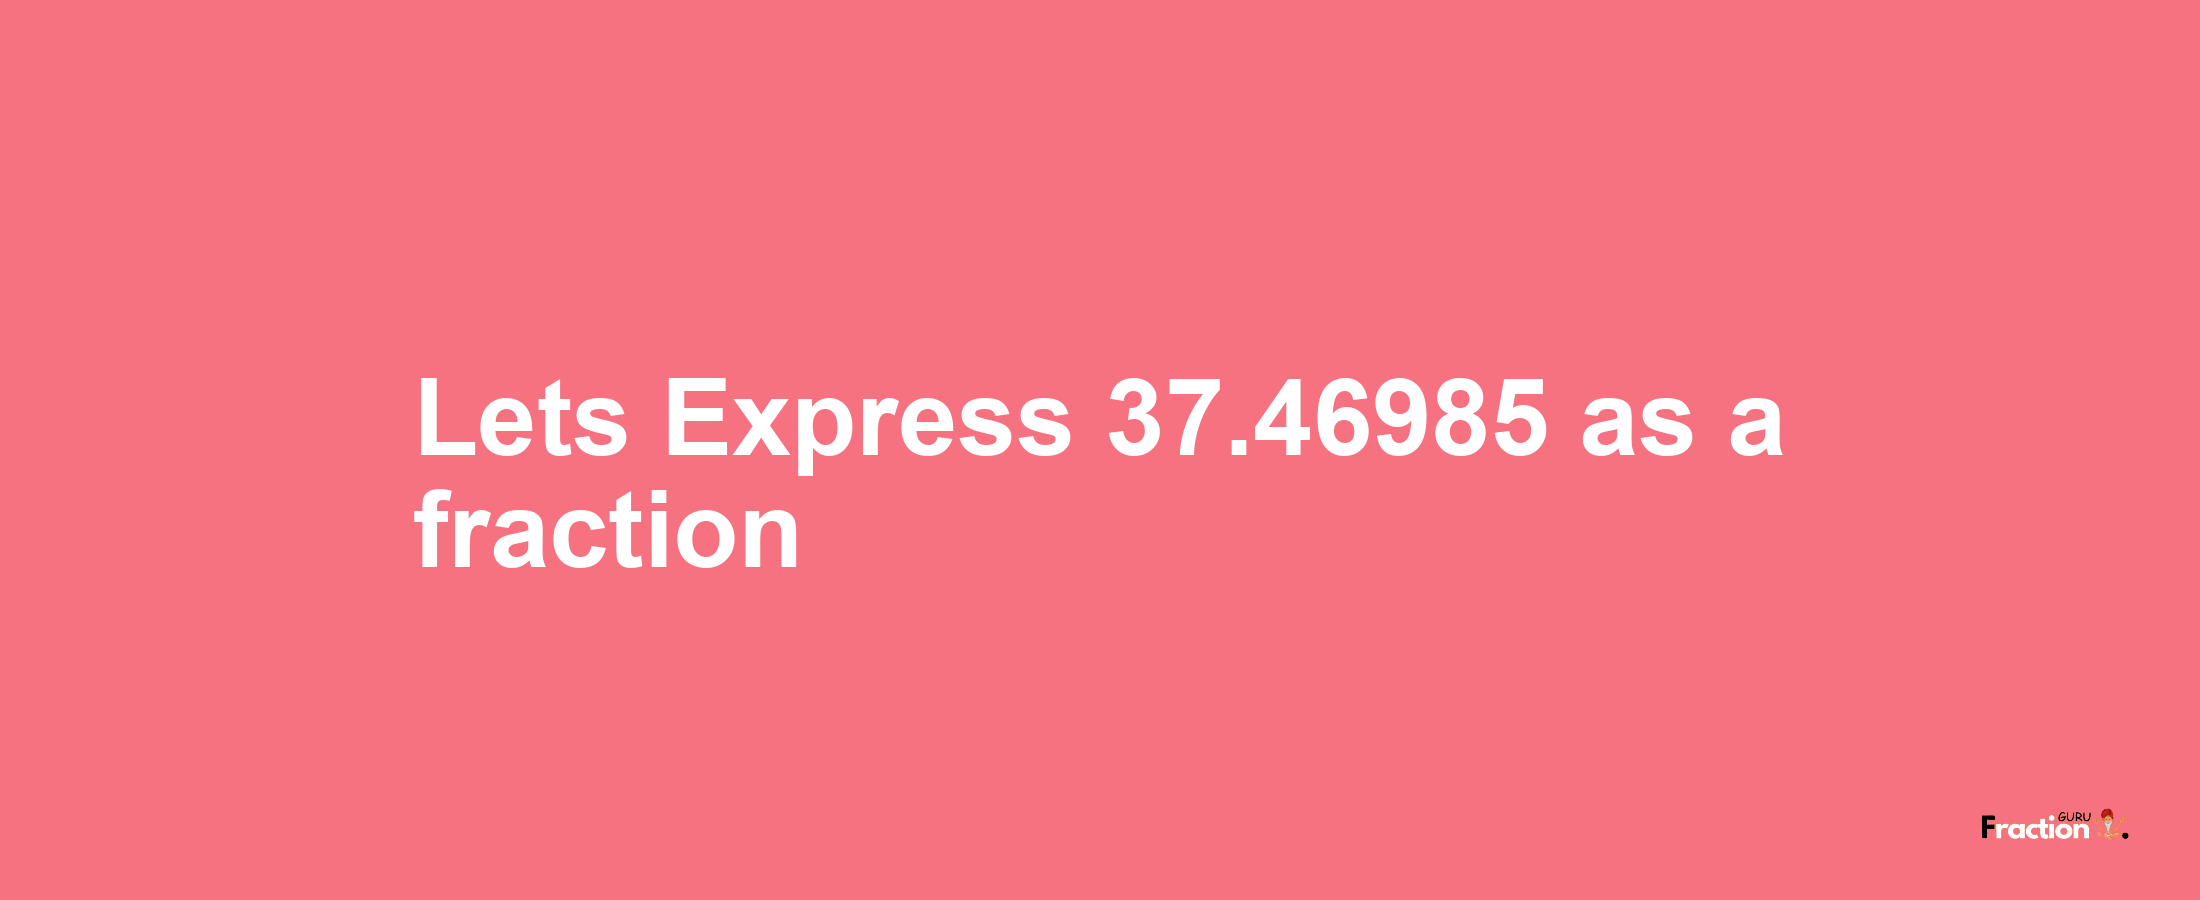 Lets Express 37.46985 as afraction